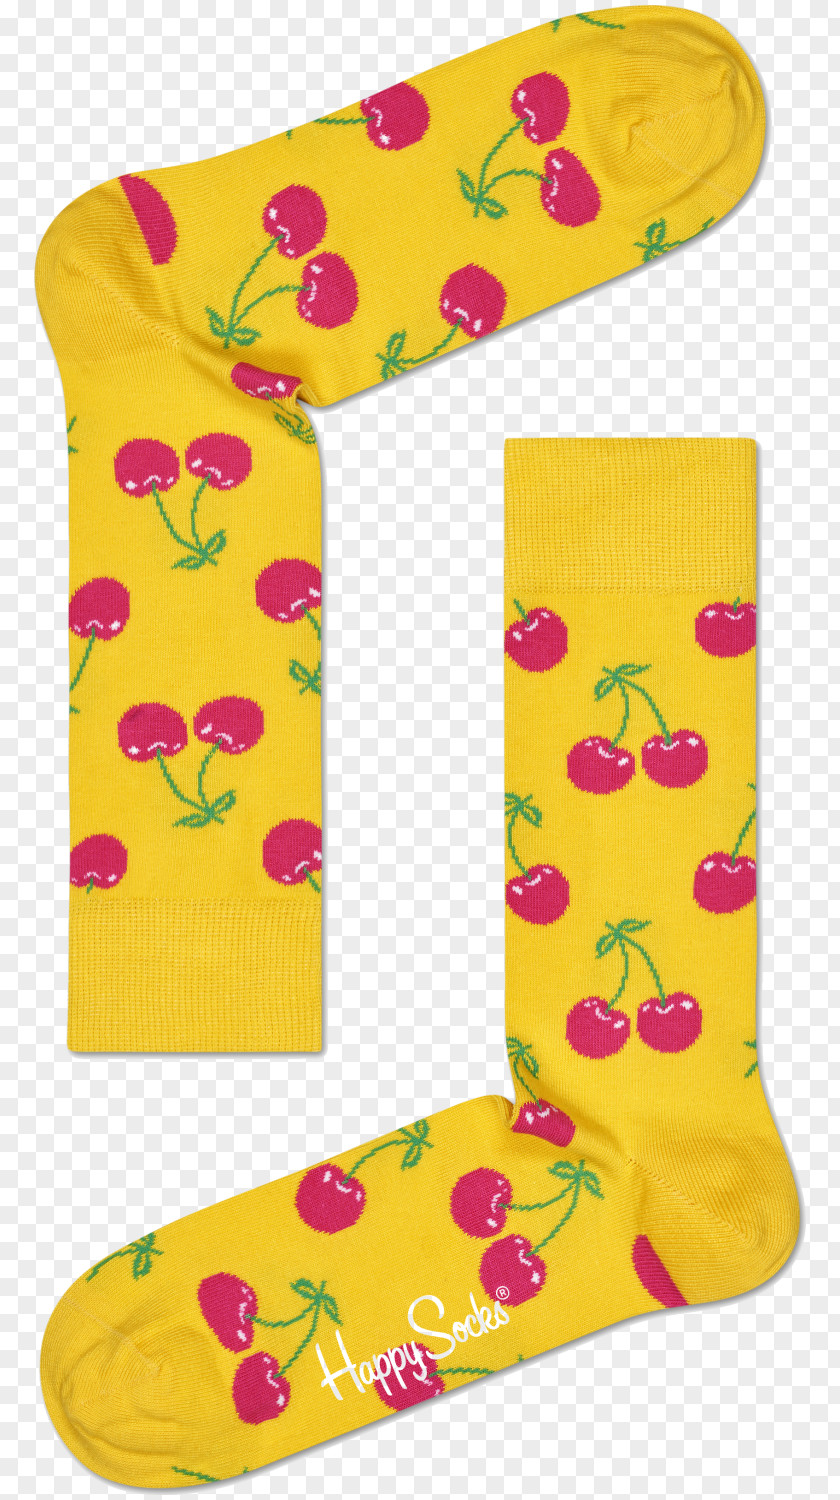 Happy Women's Day Socks Clothing Accessories Cotton PNG